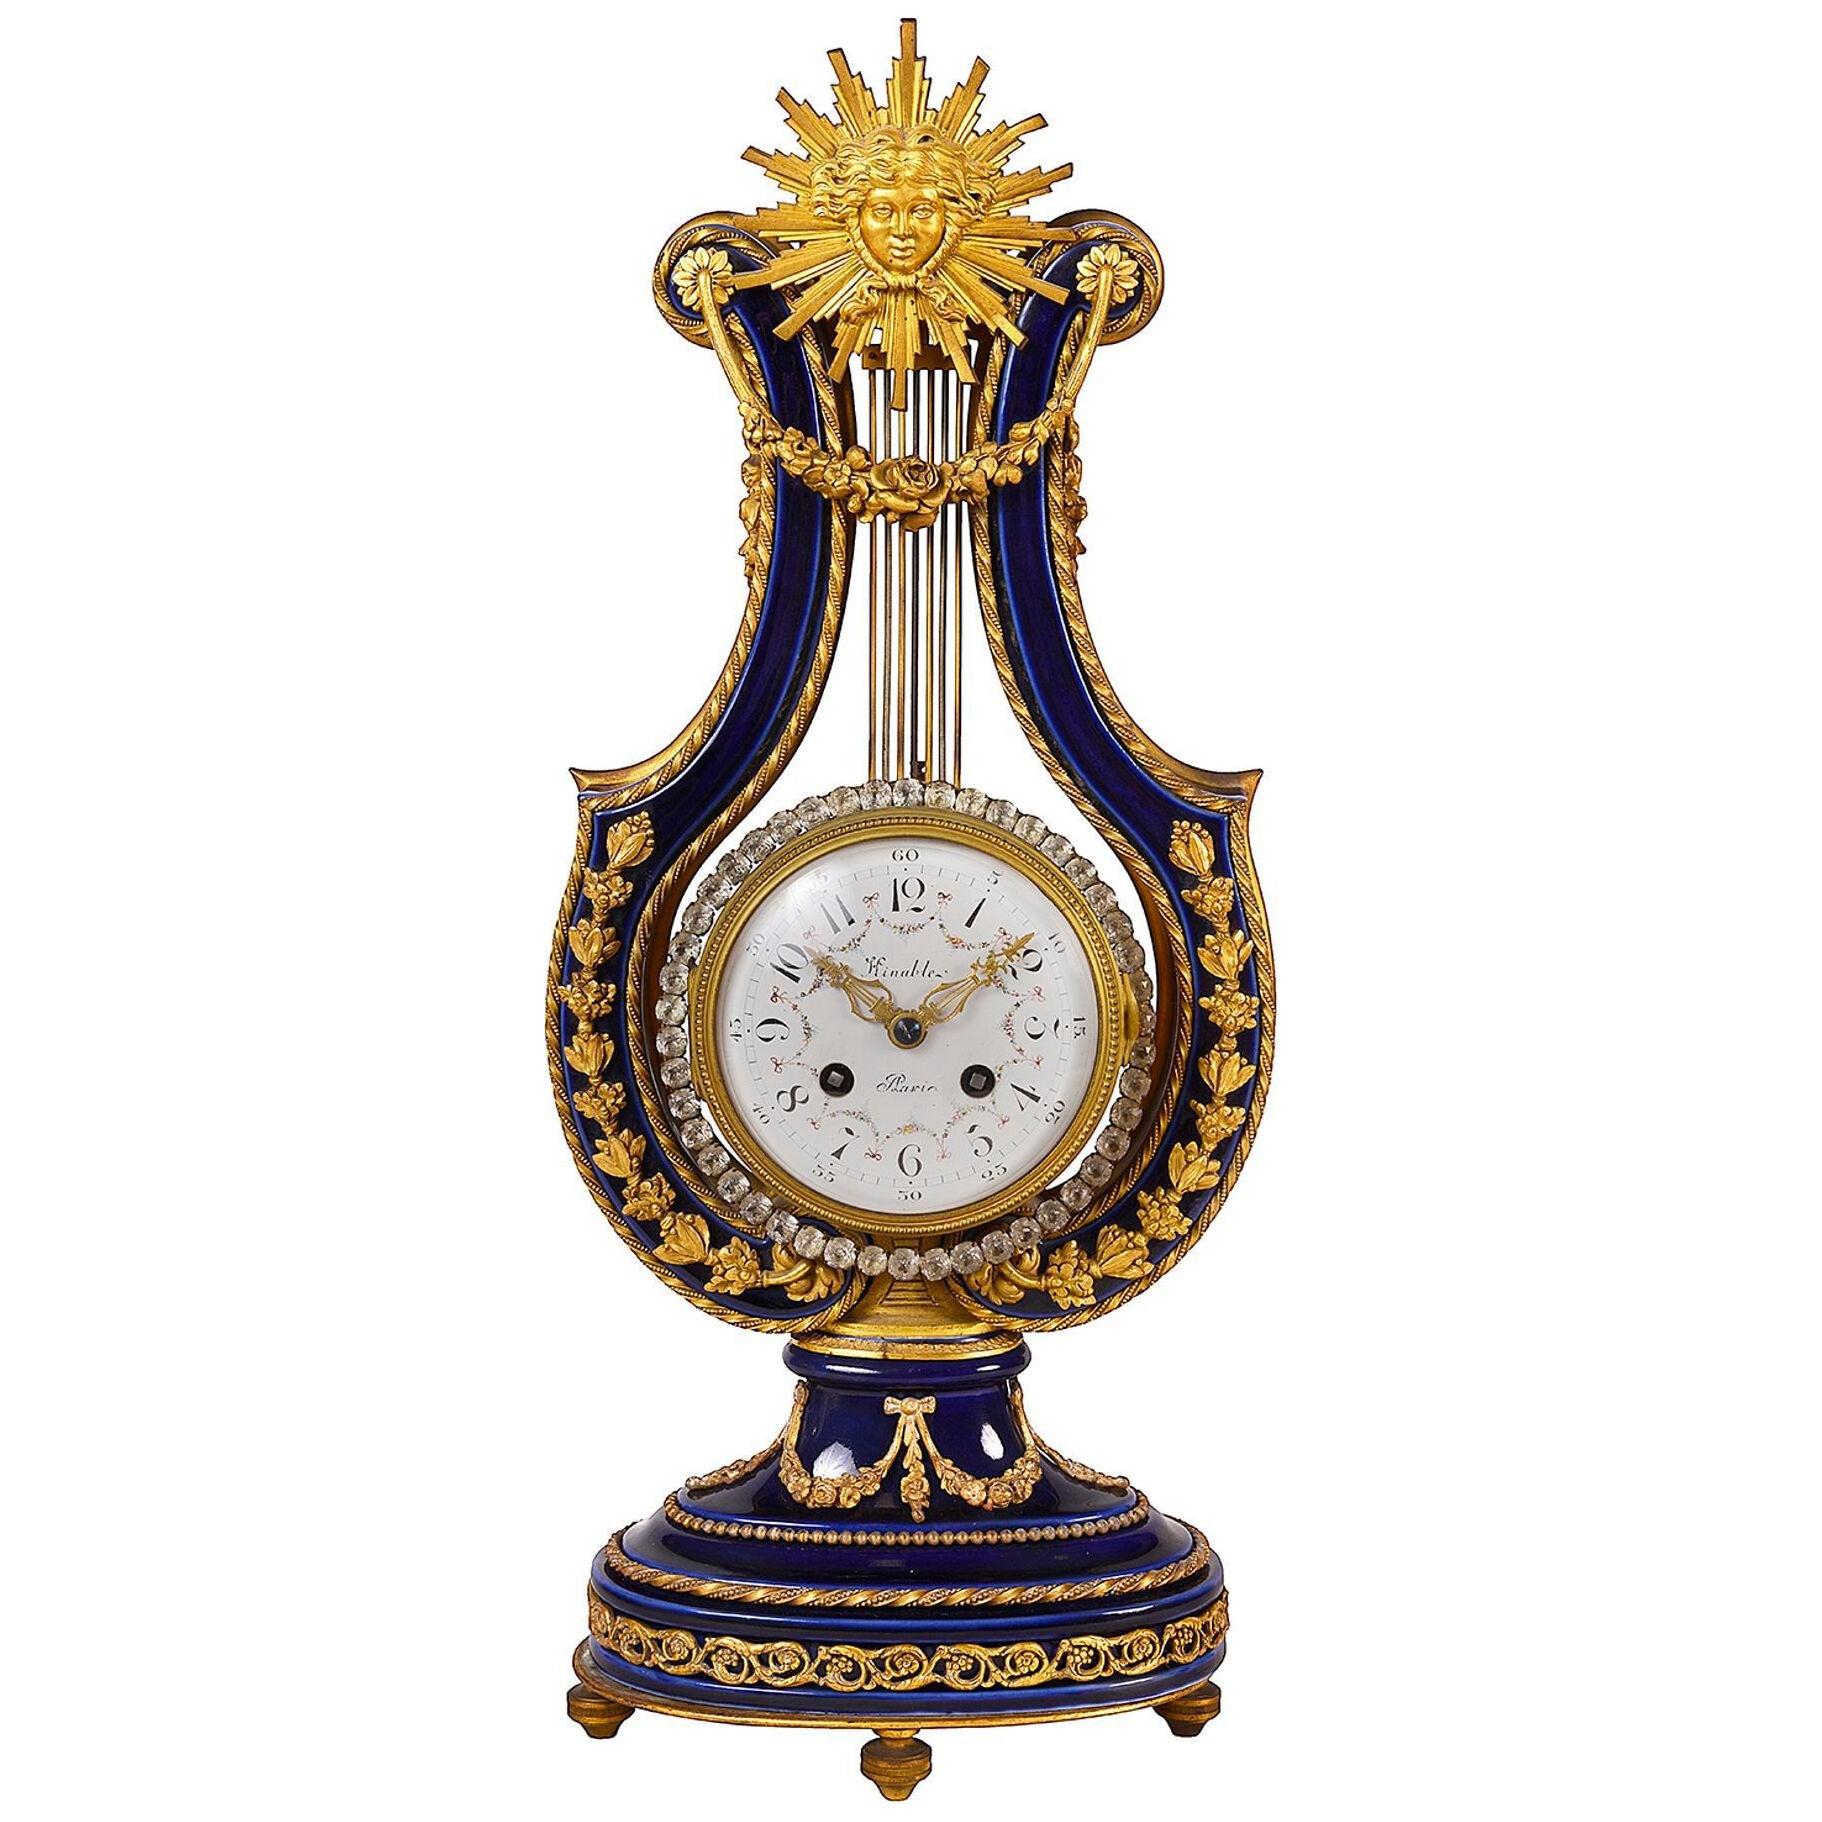 A French Sevres style porcelain and ormolu-mounted lyre clock